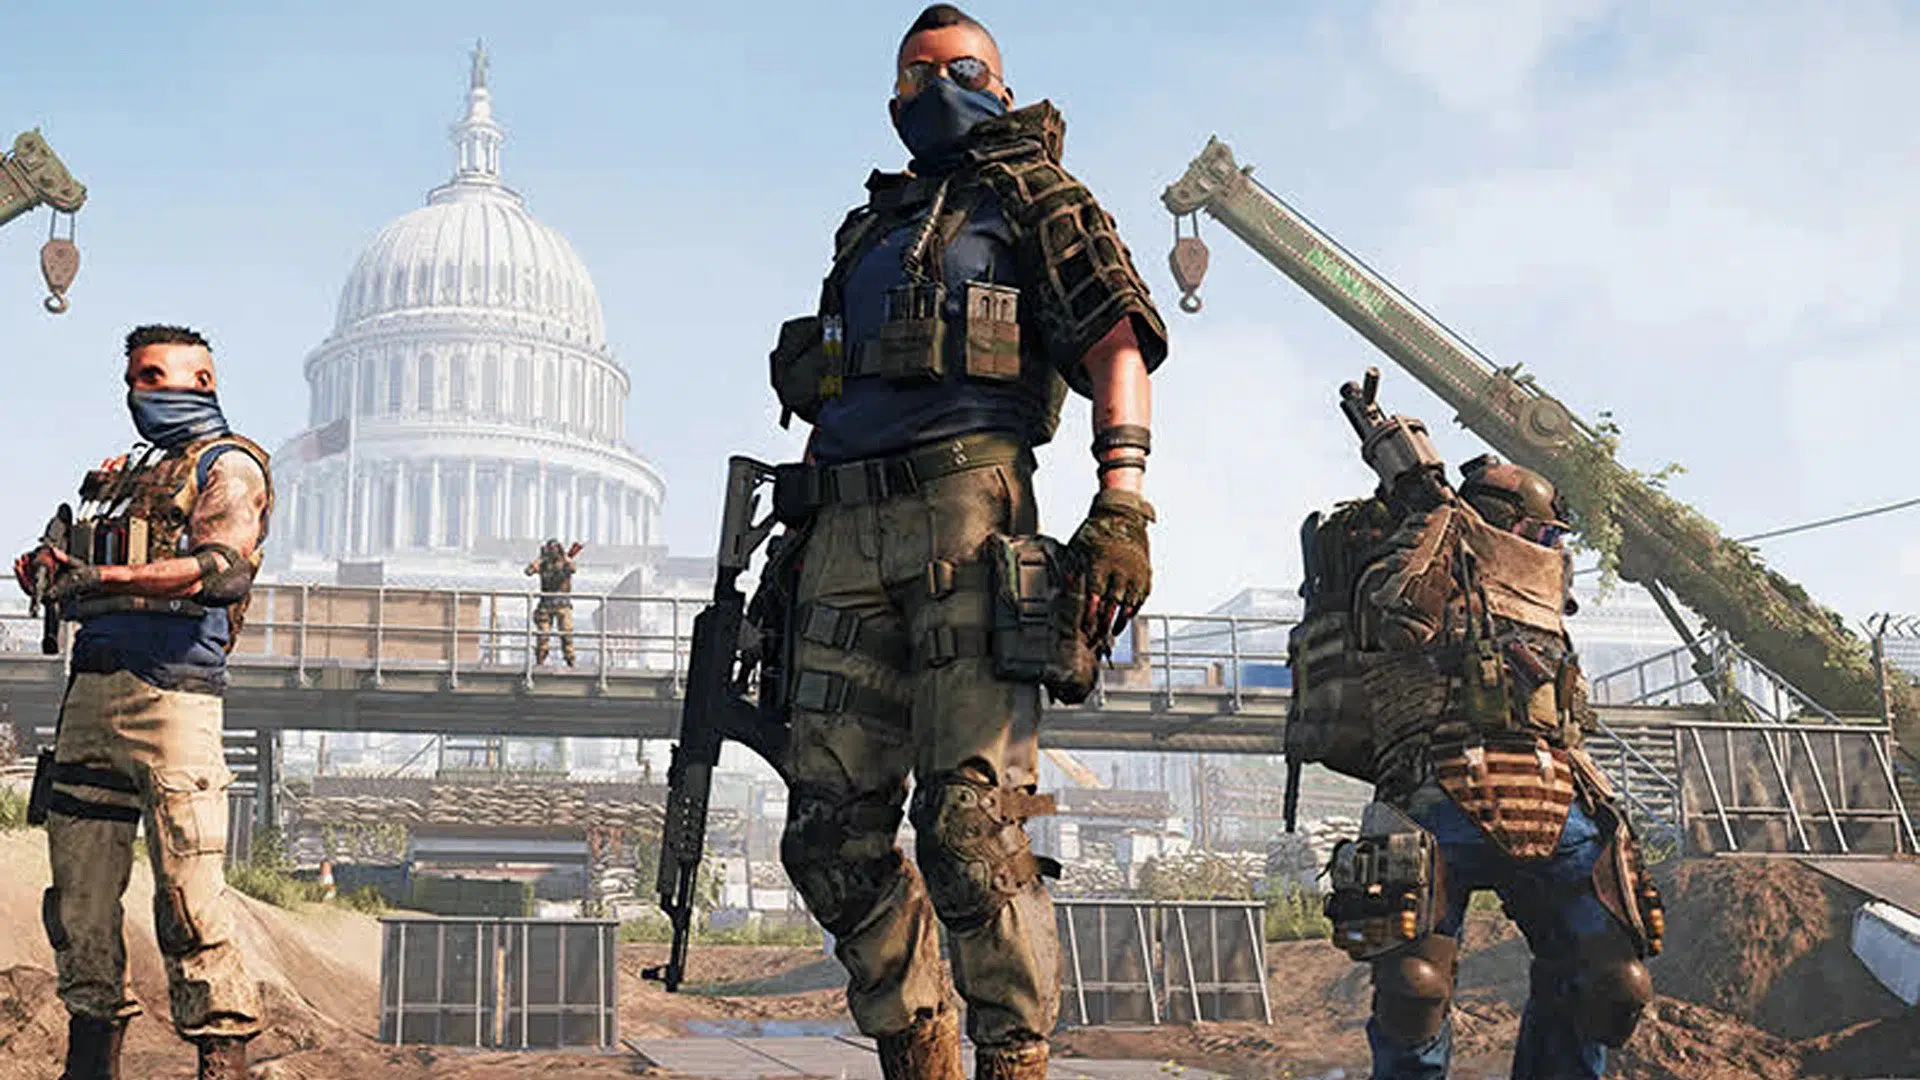 Players of The Division 2 who exploited a vulnerability in Descent mode will be punished: they will face a temporary account ban